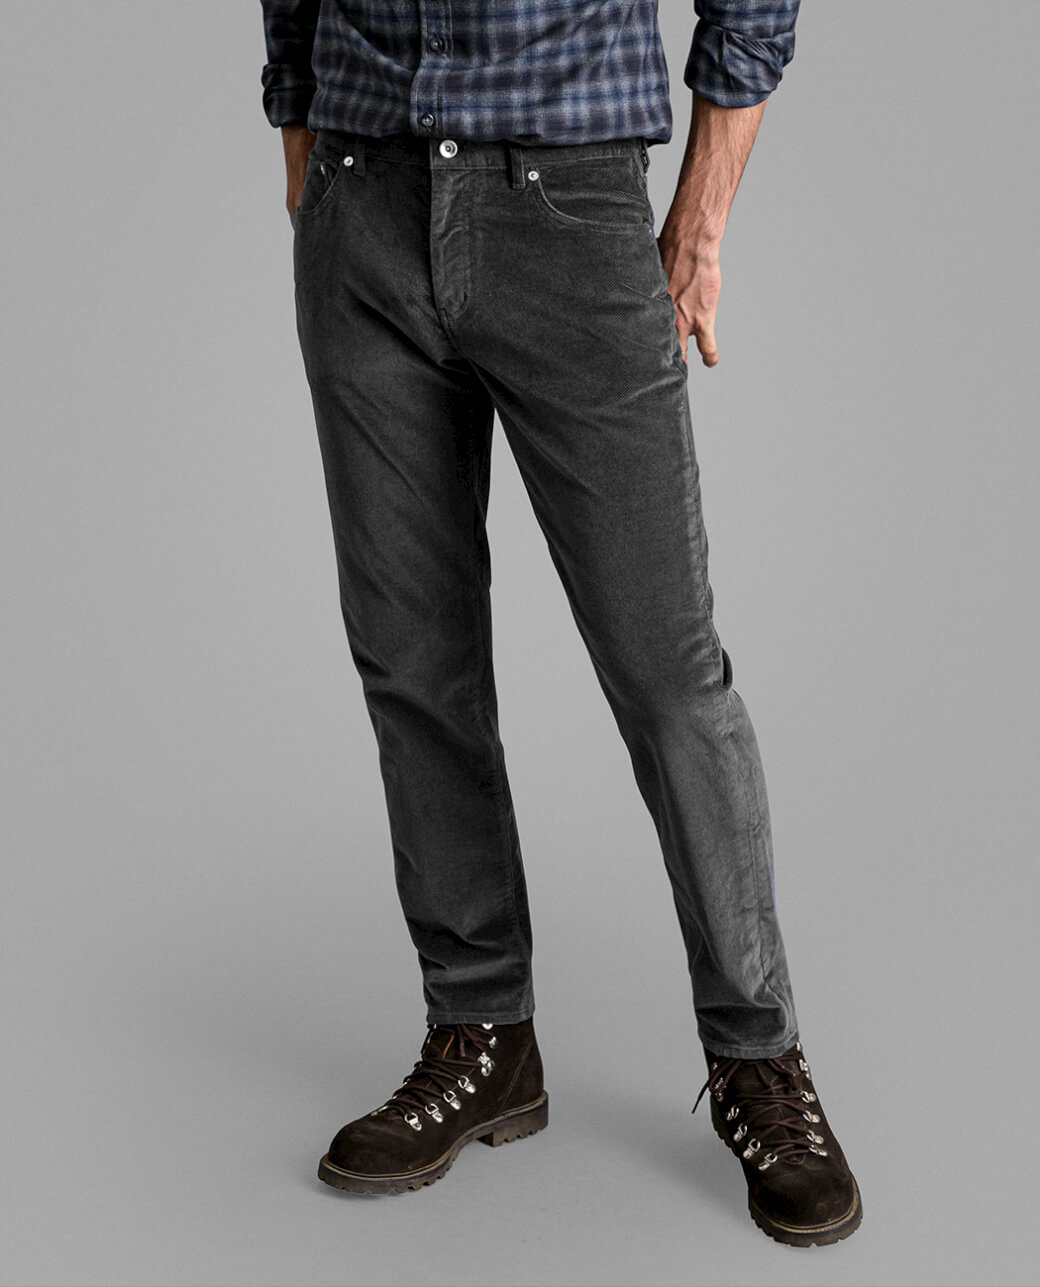 Shop Custom Pants | All Men's Pants, Trousers, and Chinos - Proper Cloth